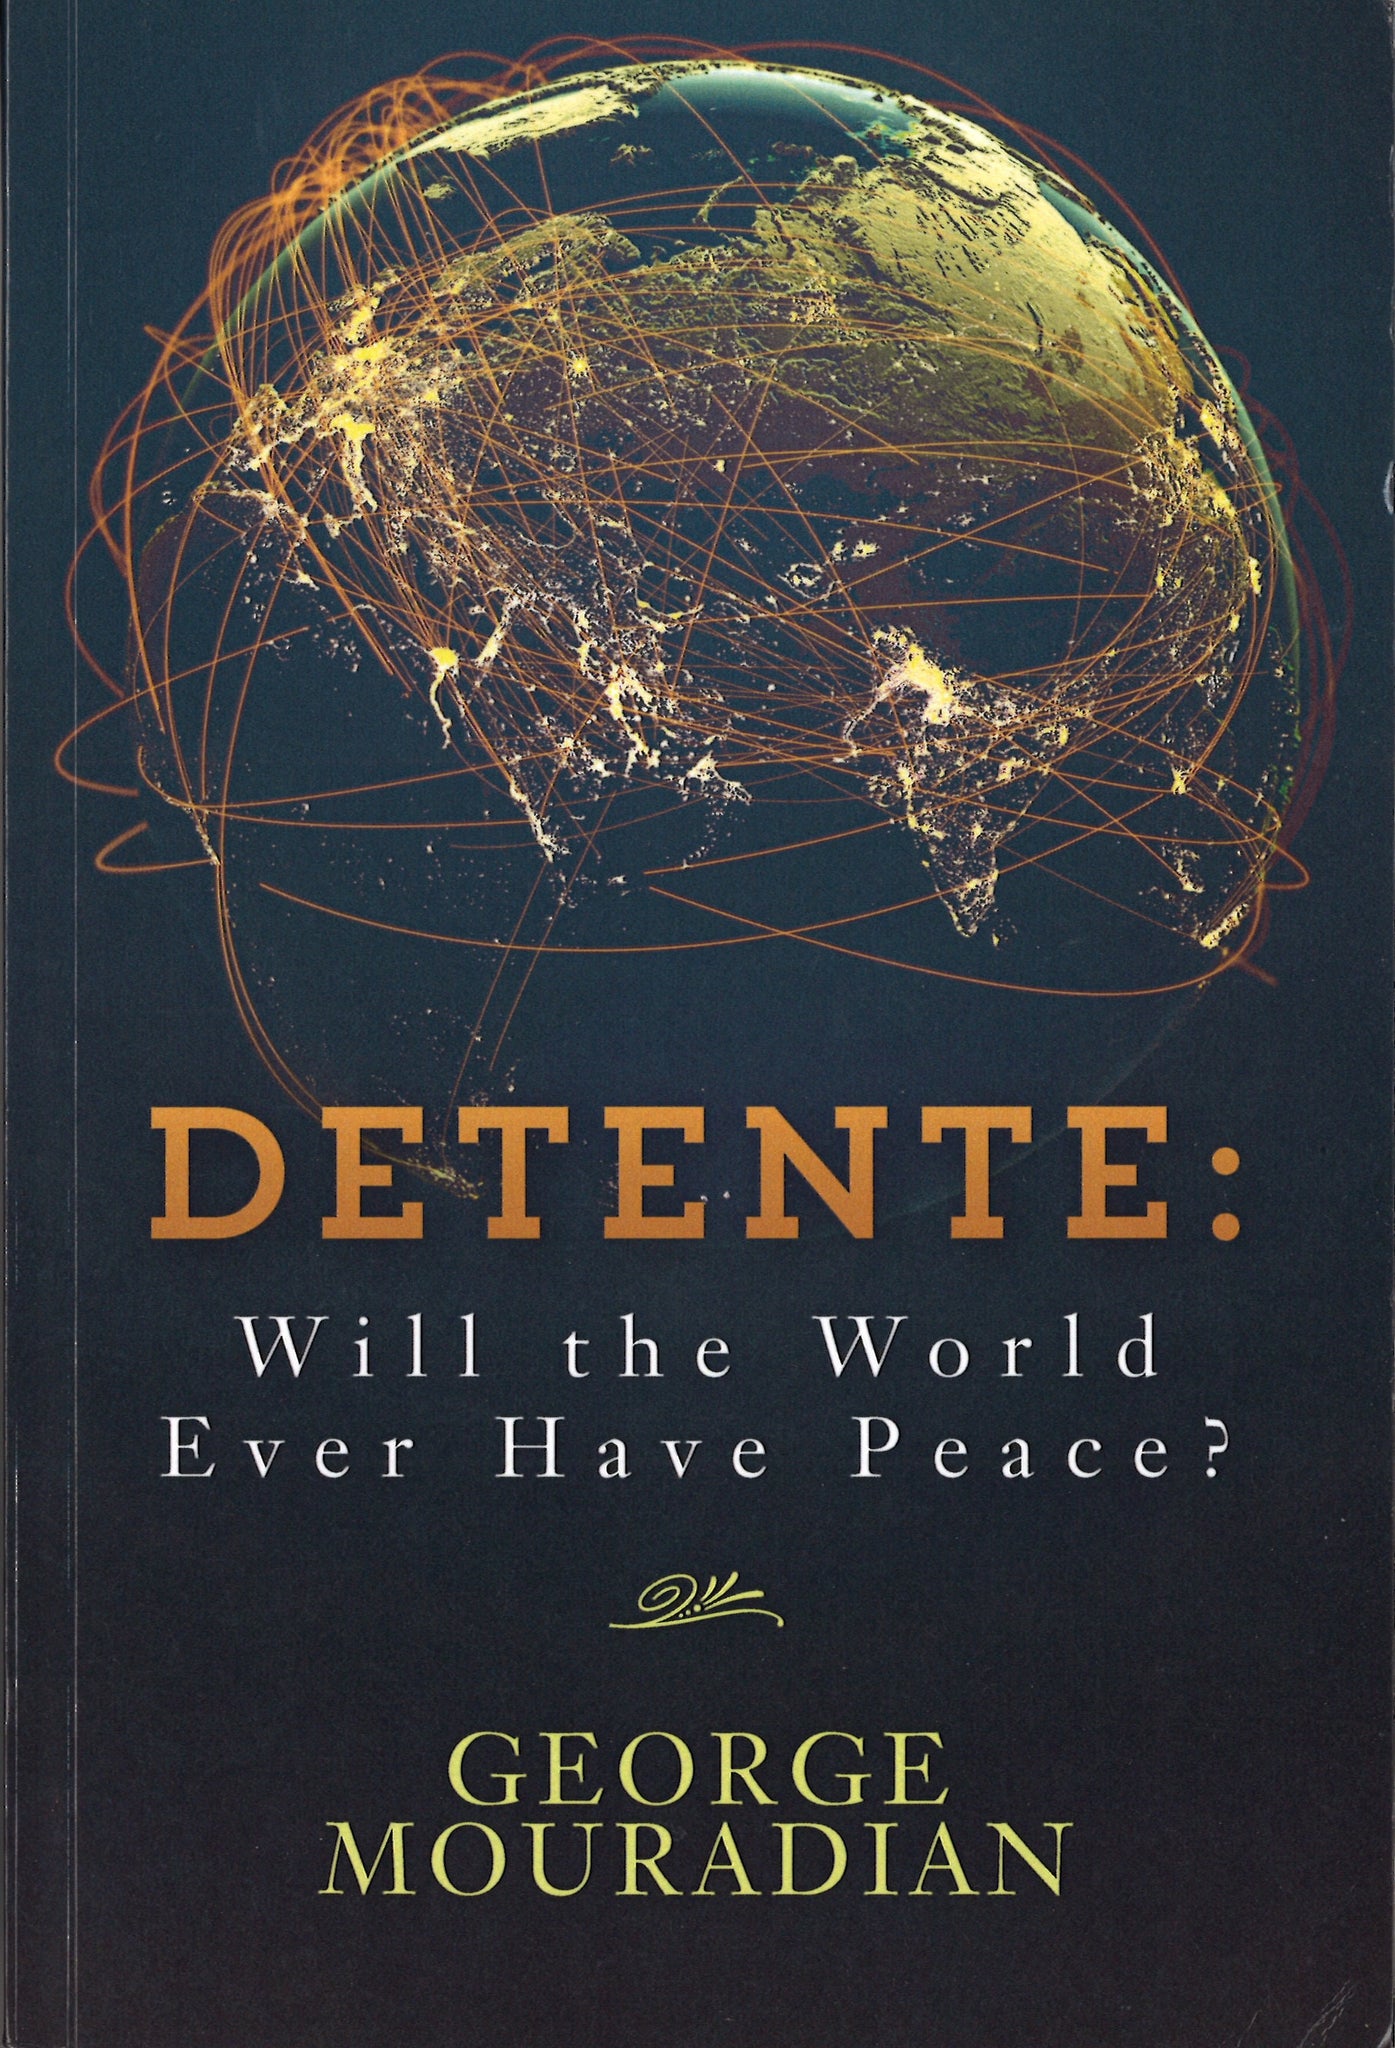 DETENTE: Will the World Ever Have Peace?